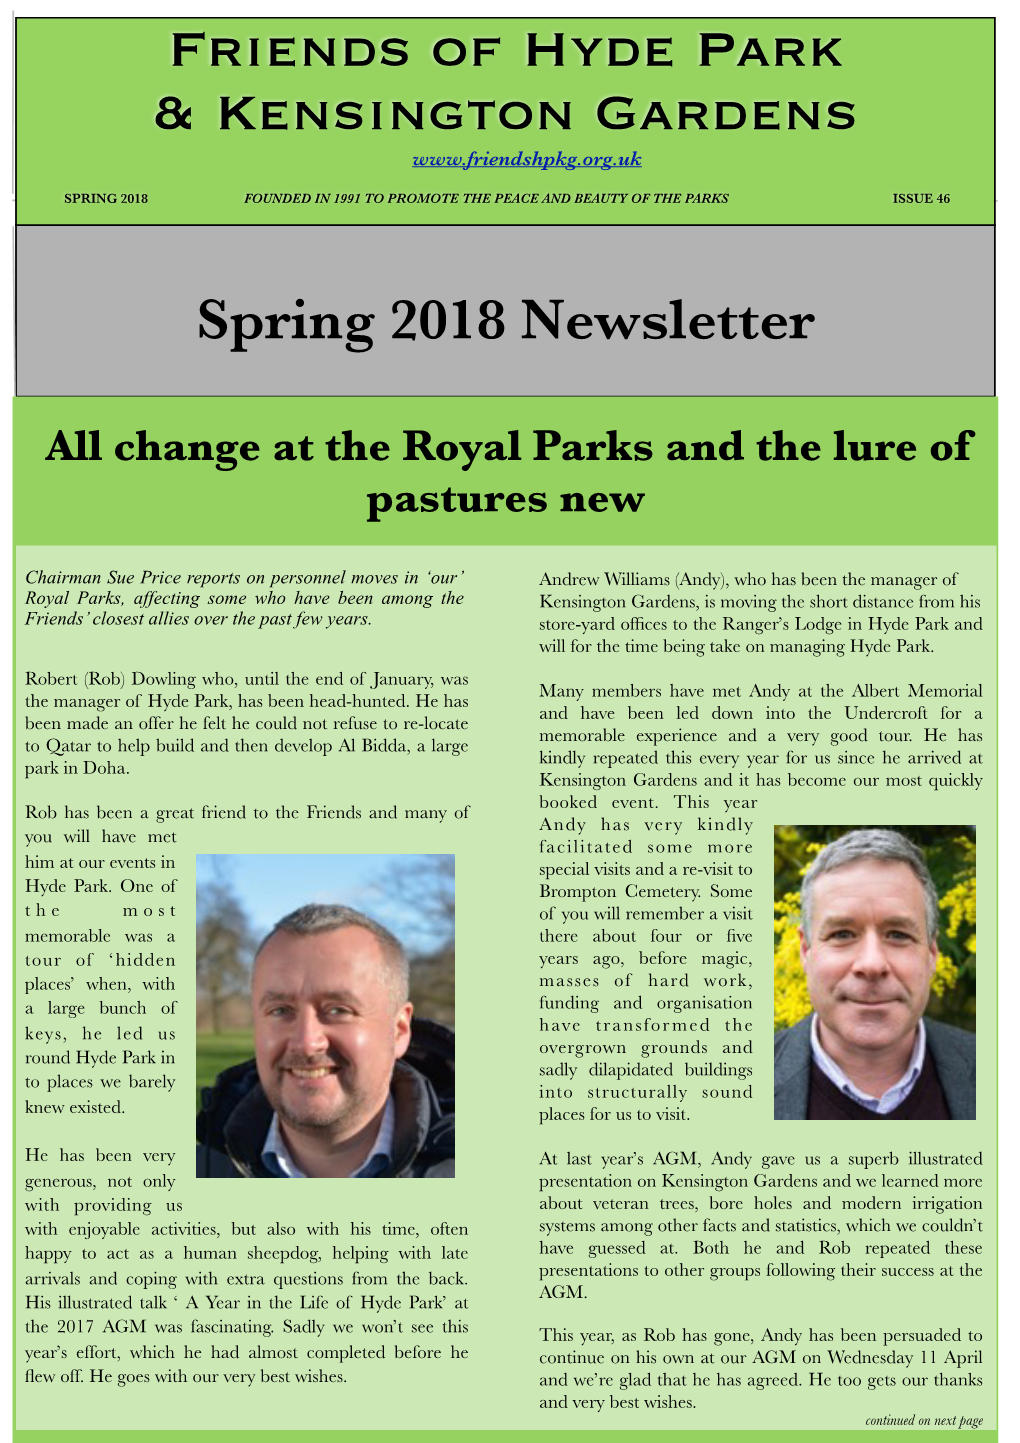 Spring 2018 Founded in 1991 to Promote the Peace and Beauty of the Parks Issue 46